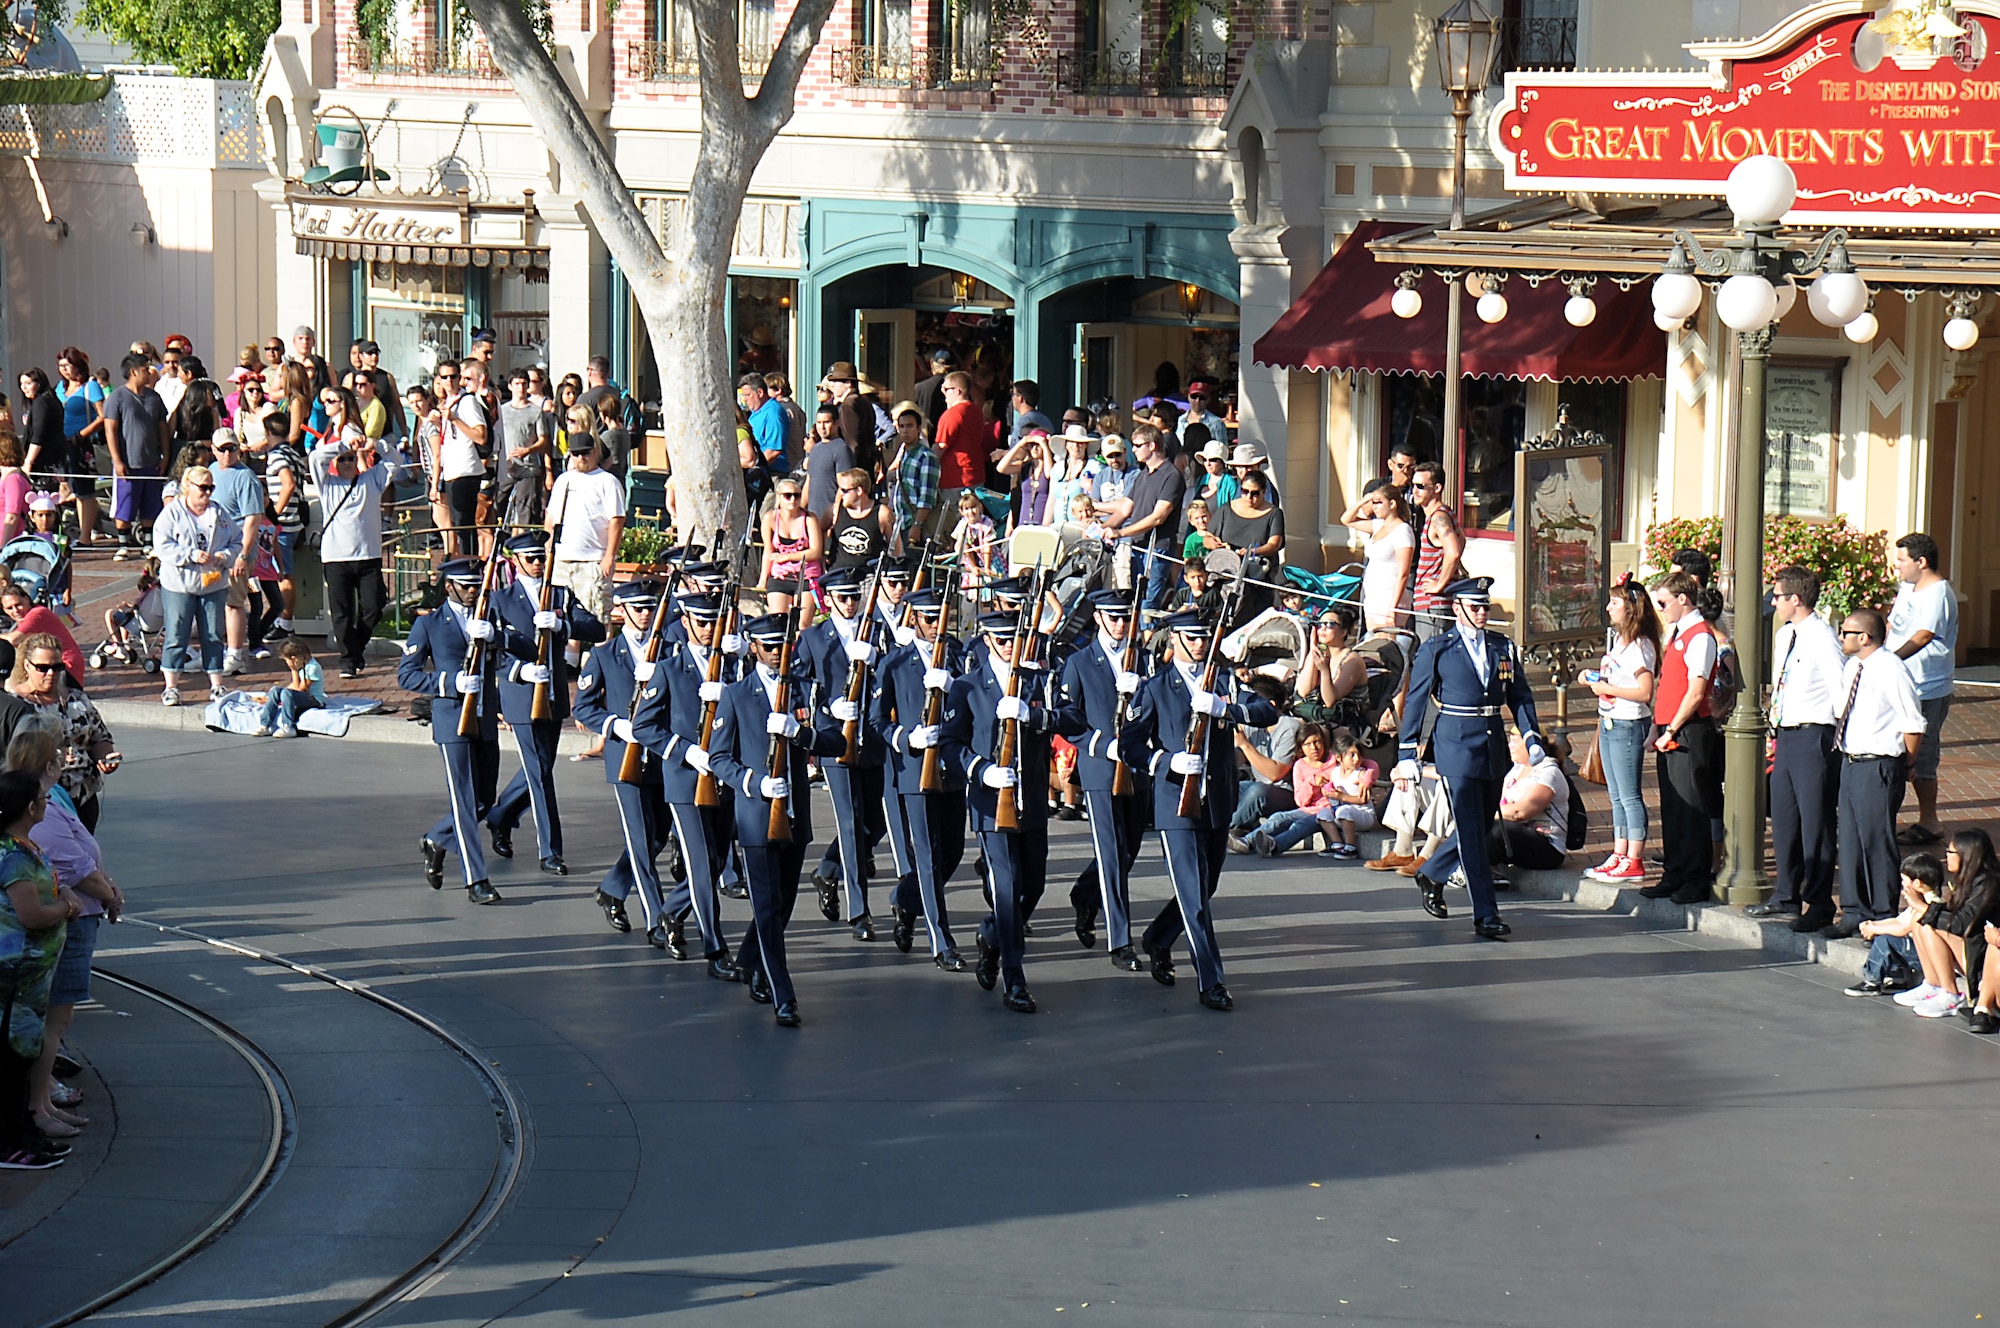 The U.S. Air Force Honor Guard Drill Team participated in the Torrance Armed Forces Day Celebration weekend May 18-20 and concluded their stay in Southern California by going to Disneyland.